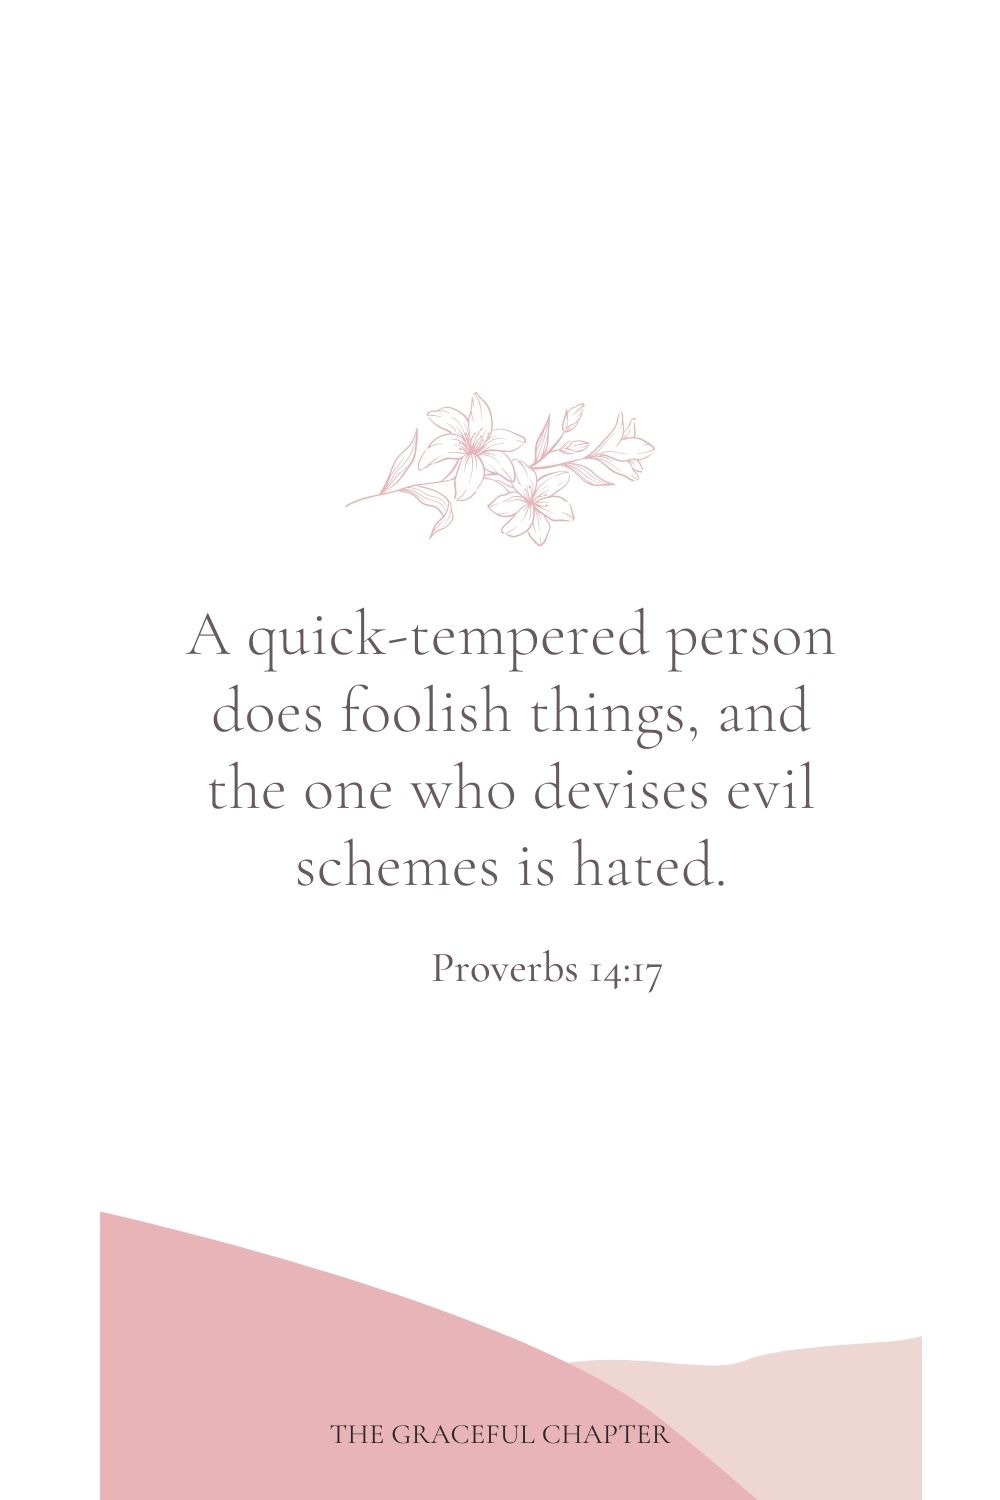 A quick-tempered person does foolish things, and the one who devises evil schemes is hated. Proverbs 14:17